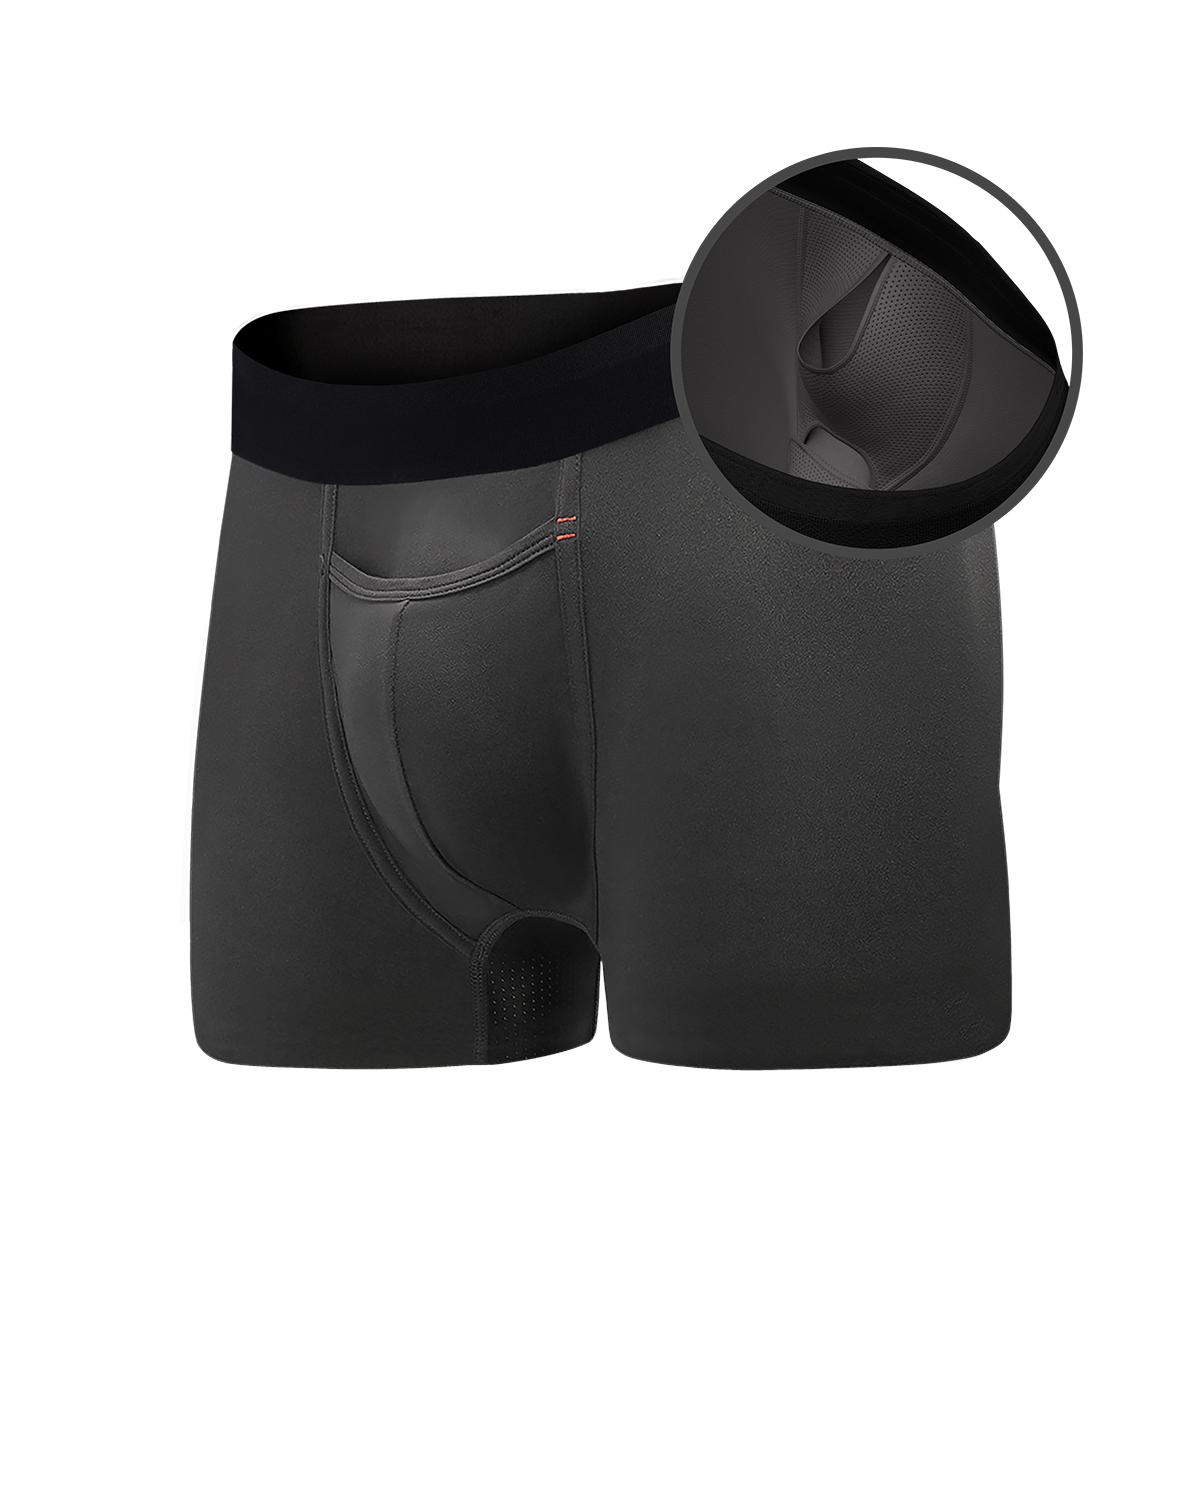 Paradise Pocket Ball Pouch Underwear – Athletic Trunk